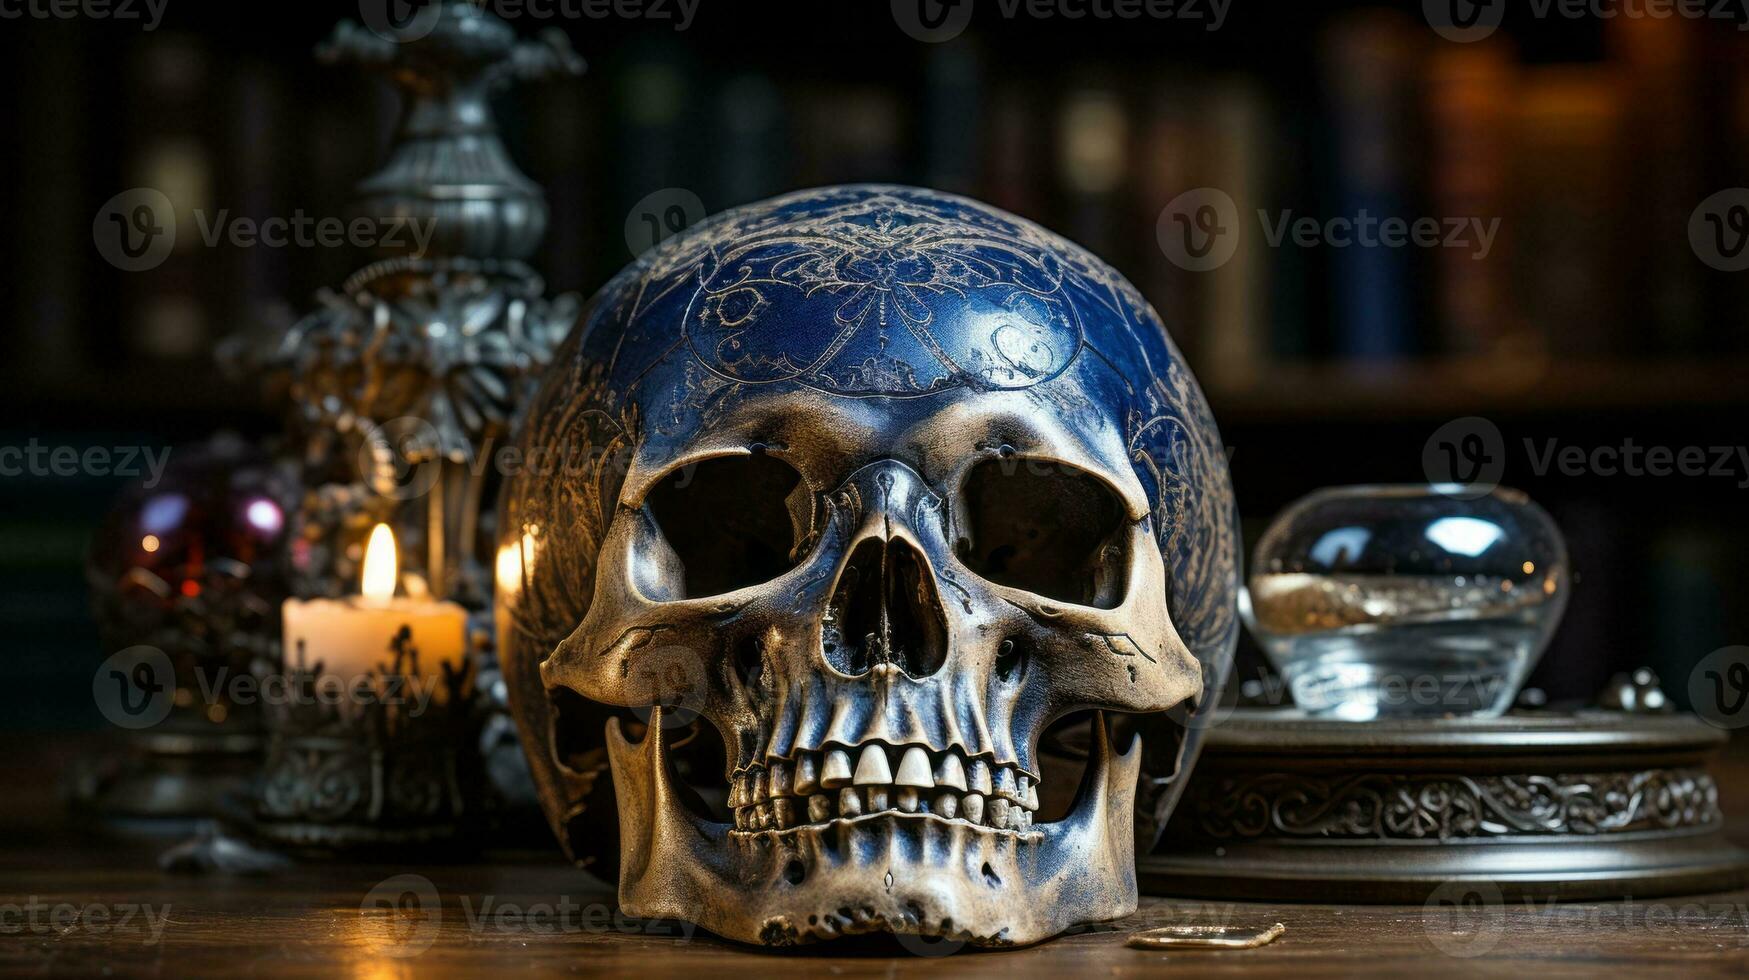 In a dark and mysterious room, a single skull peers out, surrounded by eerie blue light and flickering candles that cast shadows across its bony surface, AI Generative photo